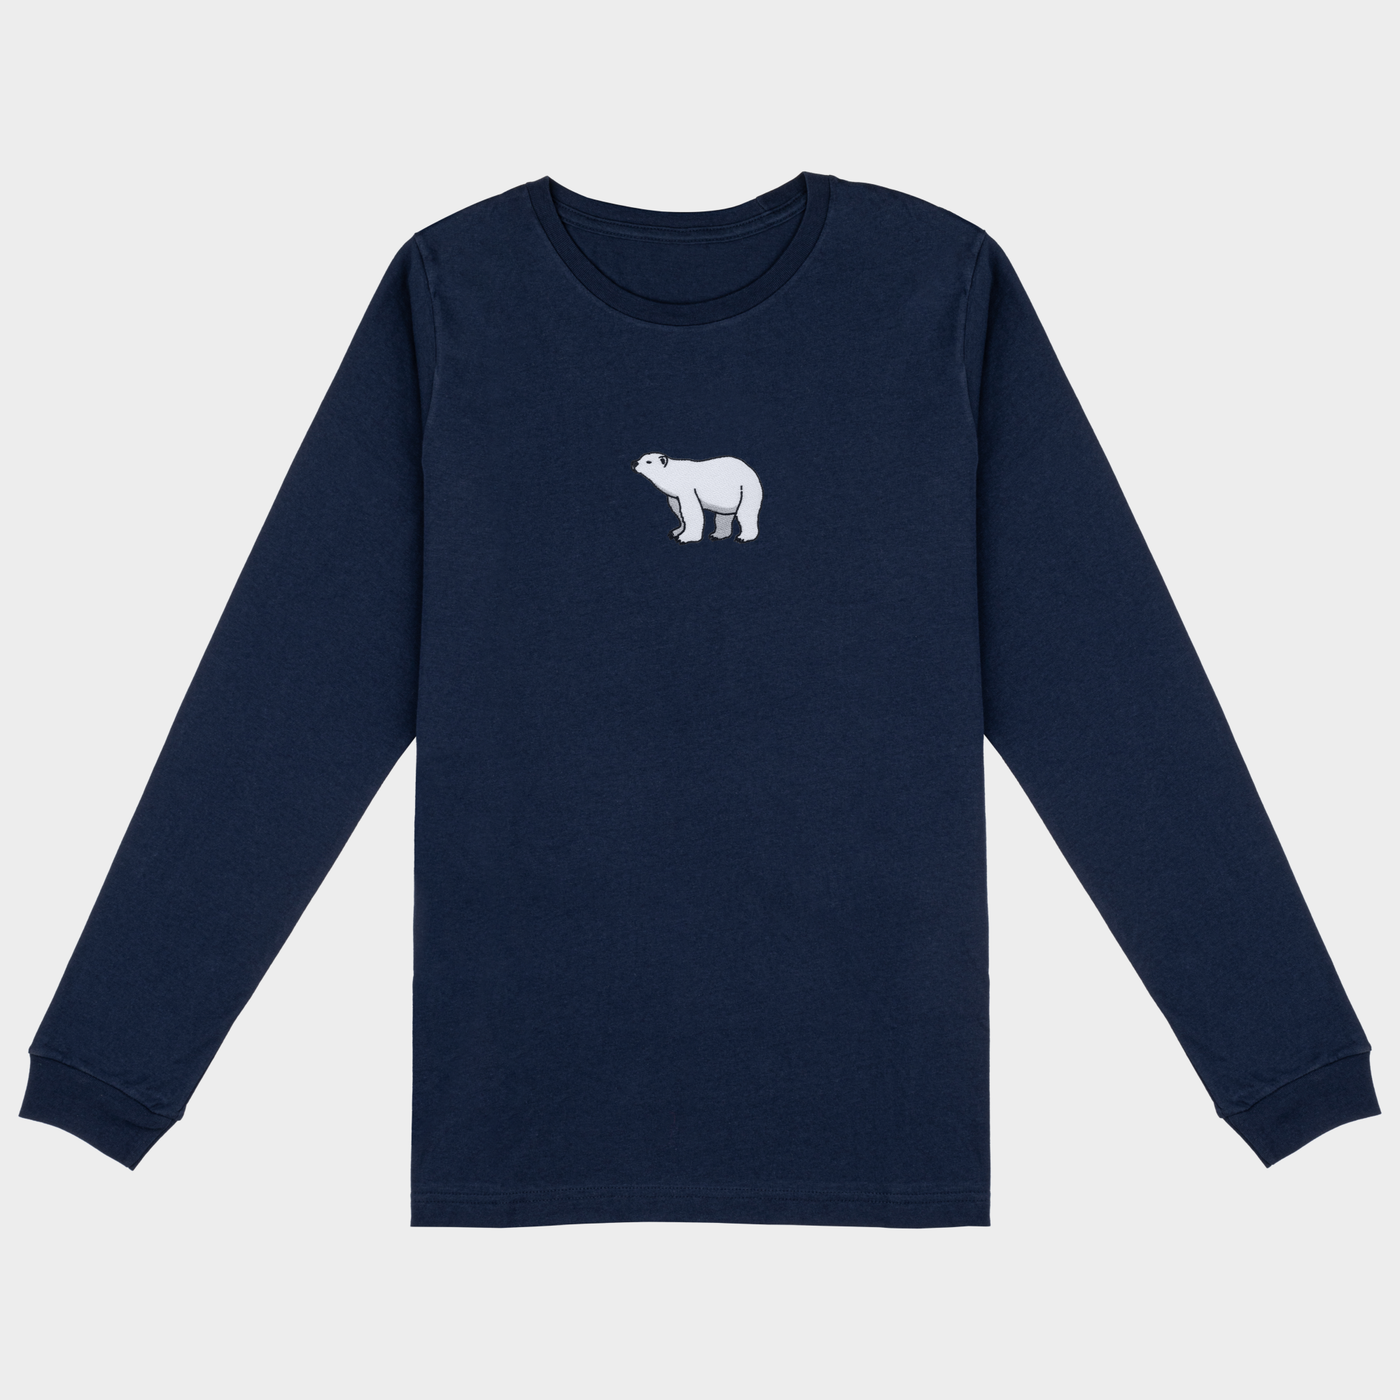 Bobby's Planet Men's Embroidered Polar Bear Long Sleeve Shirt from Arctic Polar Animals Collection in Navy Color#color_navy